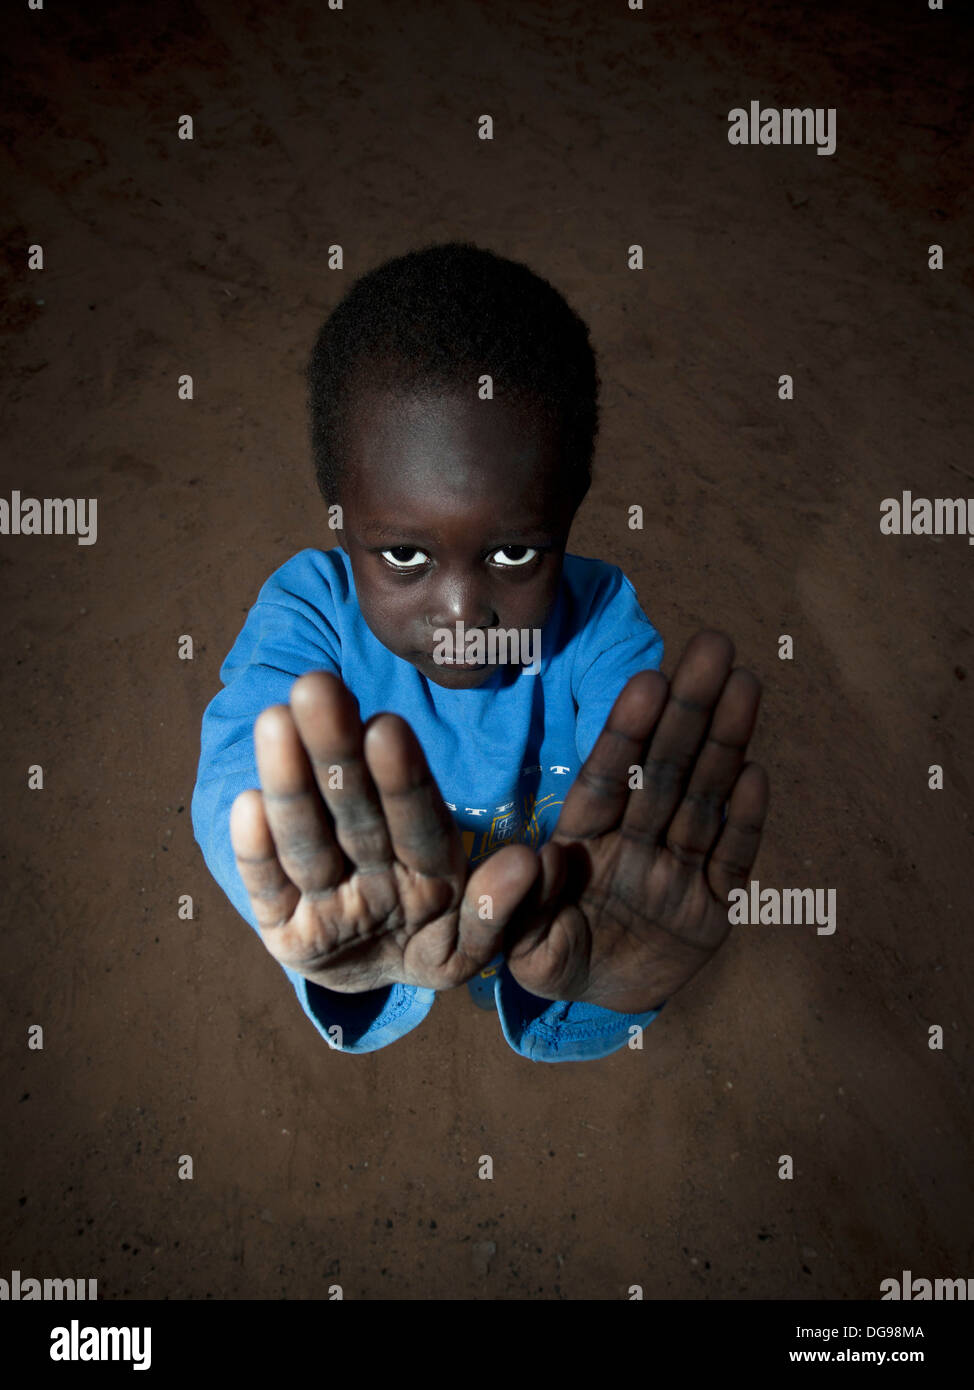 young refugee from the sudan Stock Photo